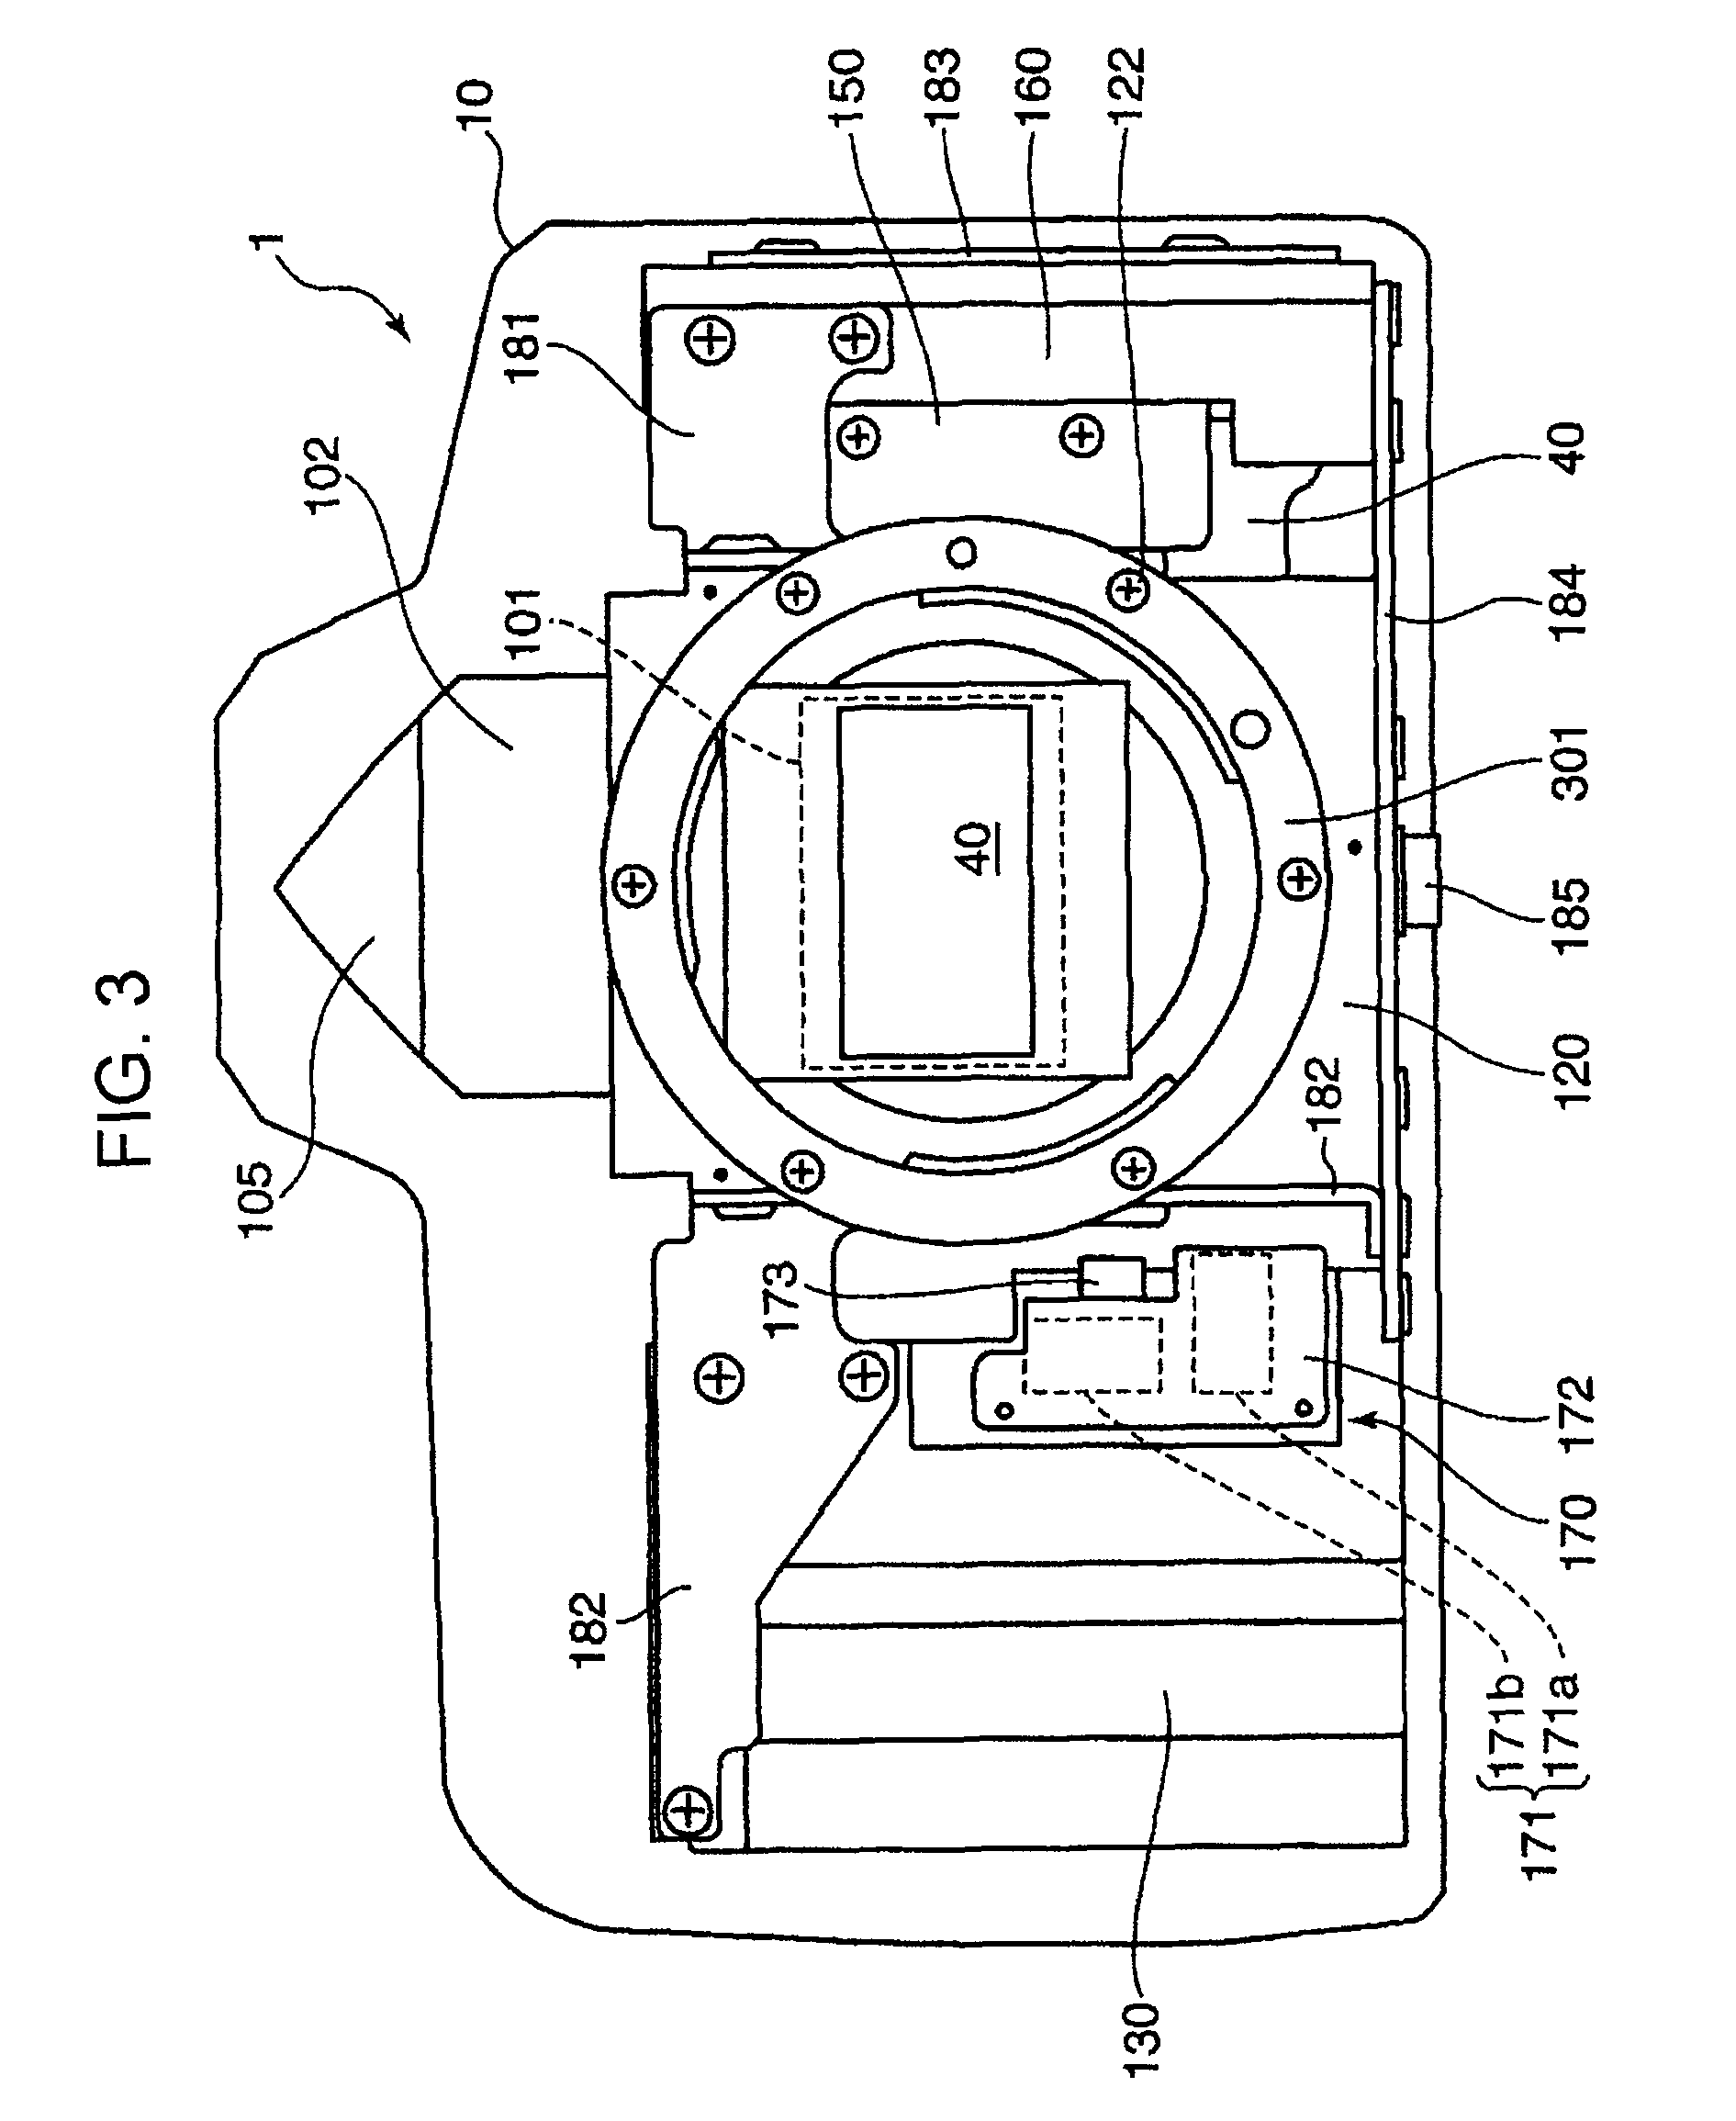 Imaging apparatus with shake correction